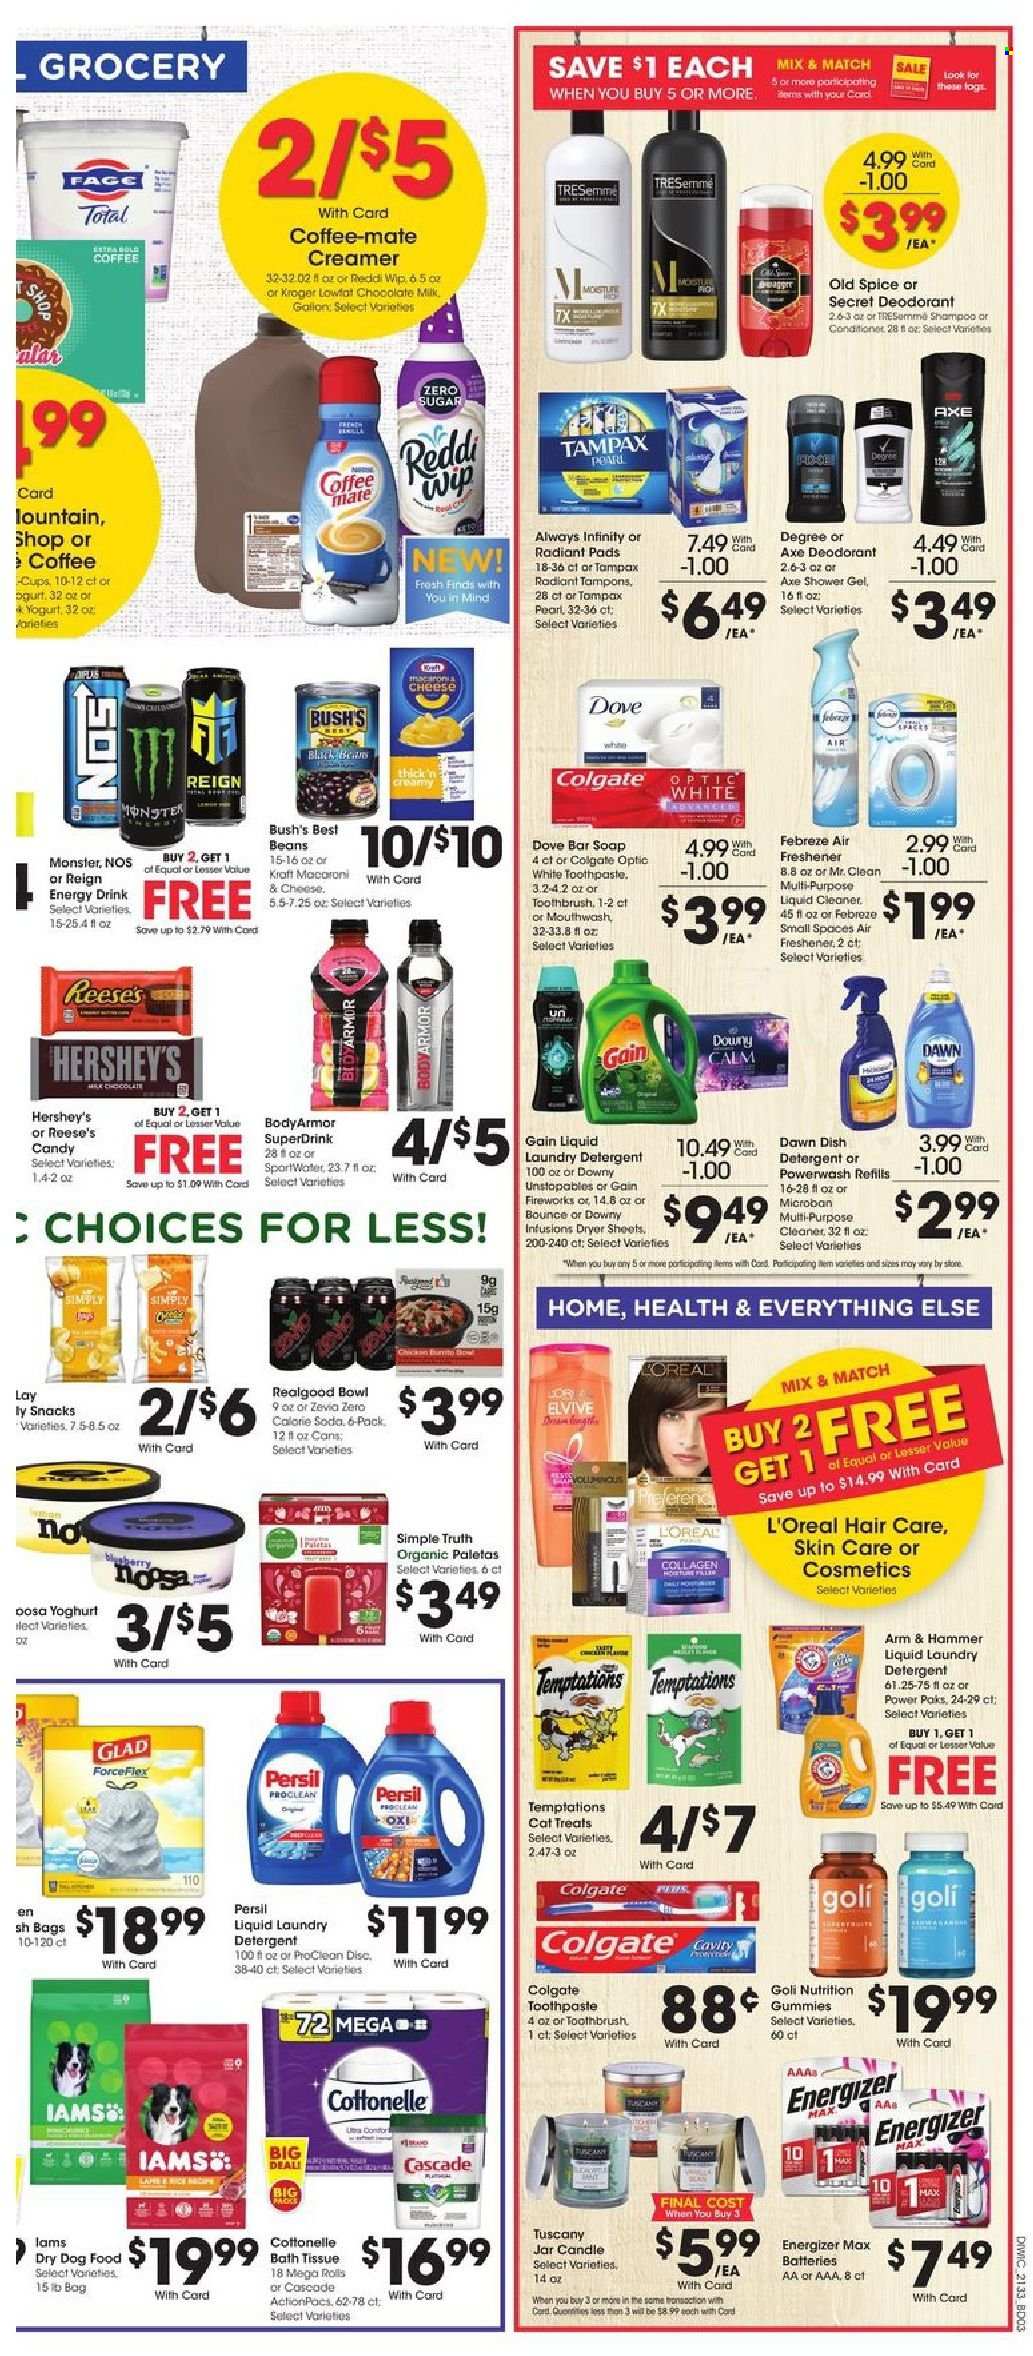 thumbnail - Dillons Flyer - 09/15/2021 - 09/21/2021 - Sales products - cod, Kraft®, yoghurt, Coffee-Mate, milk, creamer, Reese's, Hershey's, milk chocolate, chocolate, snack, ARM & HAMMER, spice, energy drink, Monster, soda, Dove, bath tissue, Cottonelle, detergent, Febreze, Gain, cleaner, liquid cleaner, Cascade, Unstopables, Persil, laundry detergent, dryer sheets, Gain Fireworks, Downy Laundry, shampoo, shower gel, Old Spice, soap bar, soap, Colgate, toothbrush, toothpaste, mouthwash, Tampax, tampons, Always Infinity, L’Oréal, conditioner, TRESemmé, anti-perspirant, deodorant, cup, bowl, candle, air freshener, battery, Energizer, animal food, dog food, dry dog food, Iams. Page 6.